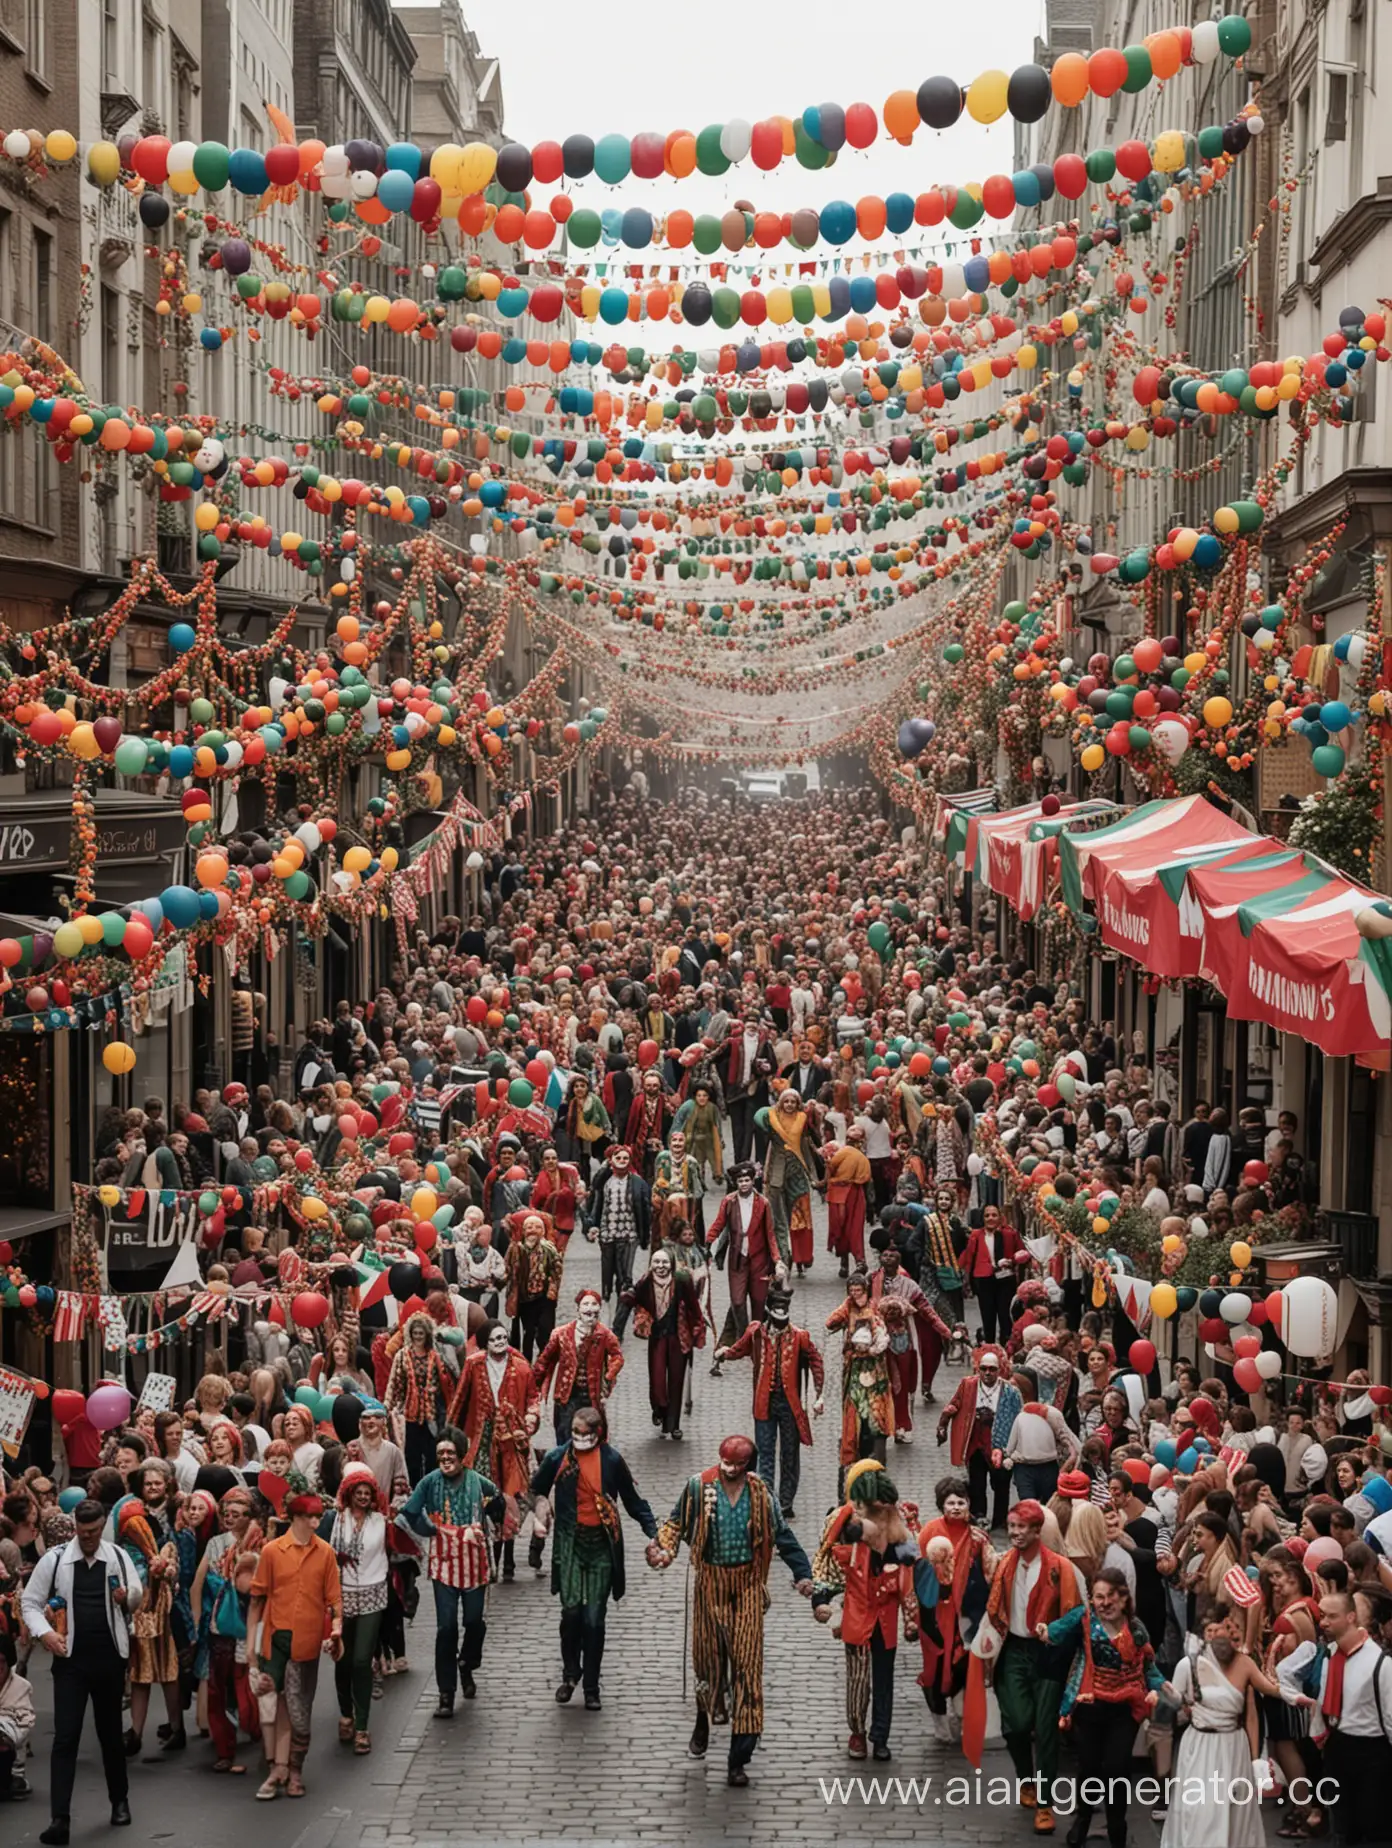 A large city street is decorated with festive garlands, flags, and balloons. On the street there are many men, women and children of all ages, dressed in domino, joker and harlequin costumes. All the people hug, dance and sing.